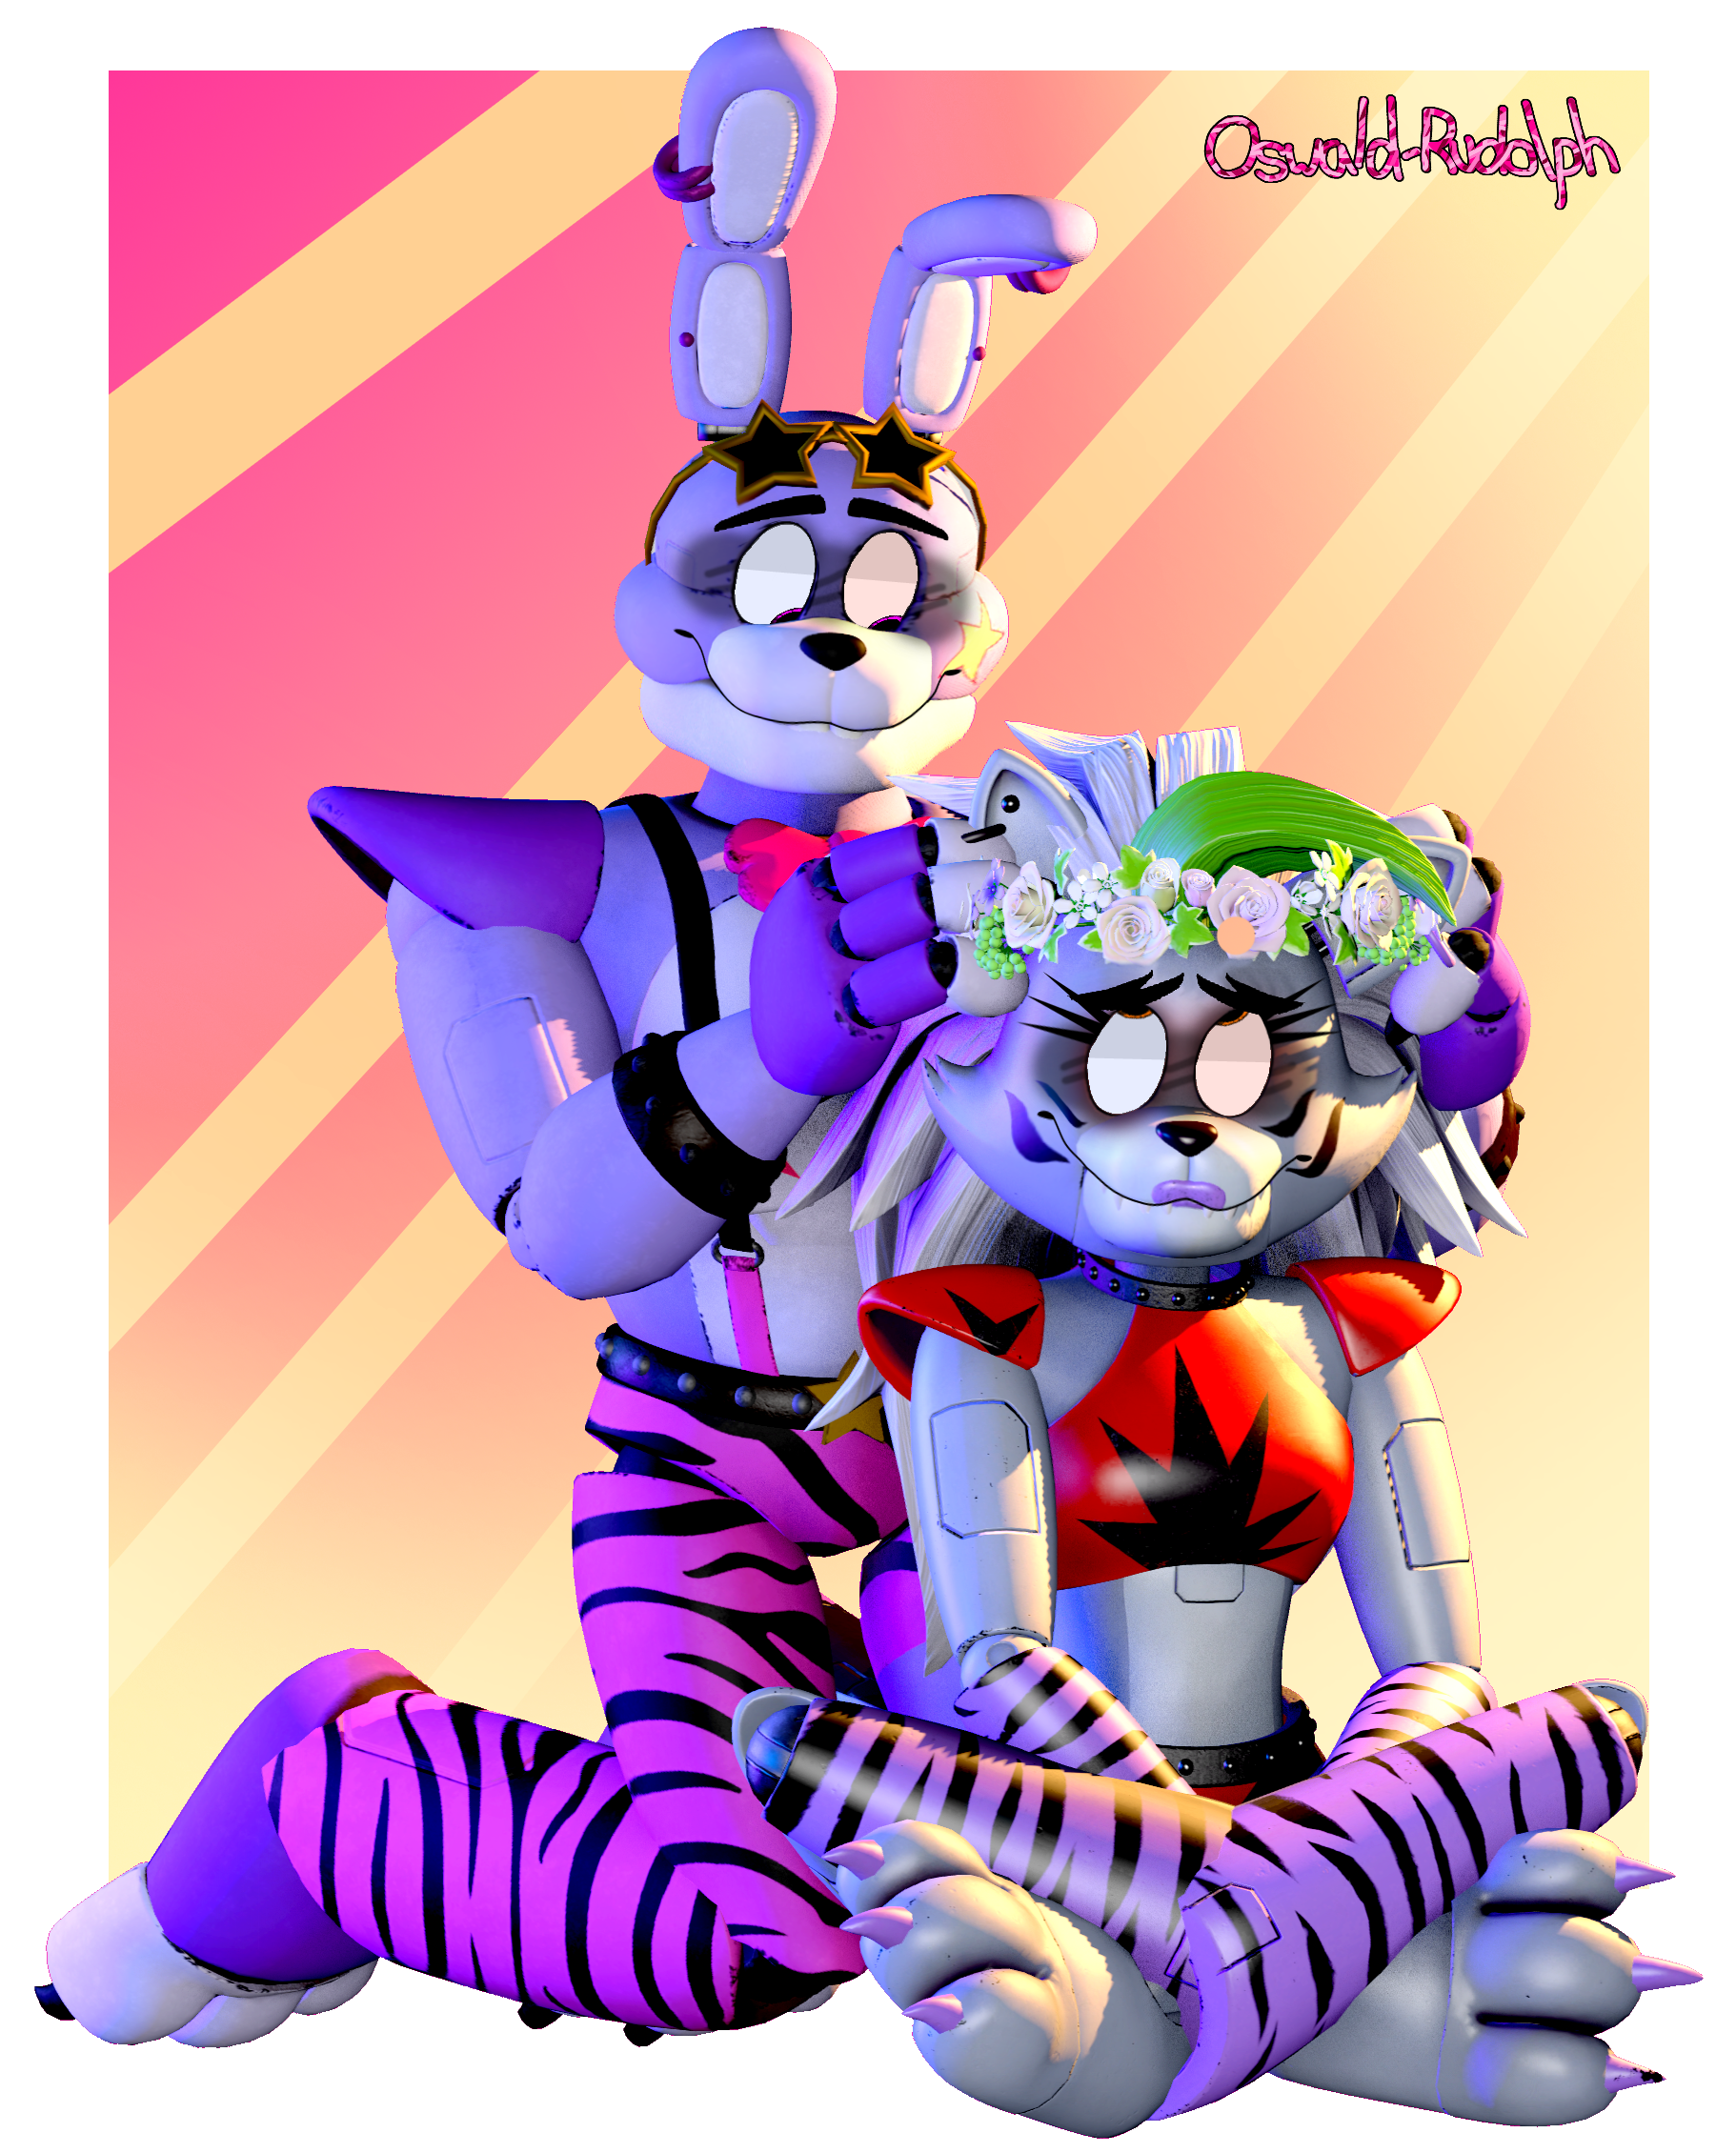 GLAMROCK BONNIE IS HERE!! by Oswald-Rudolph on DeviantArt